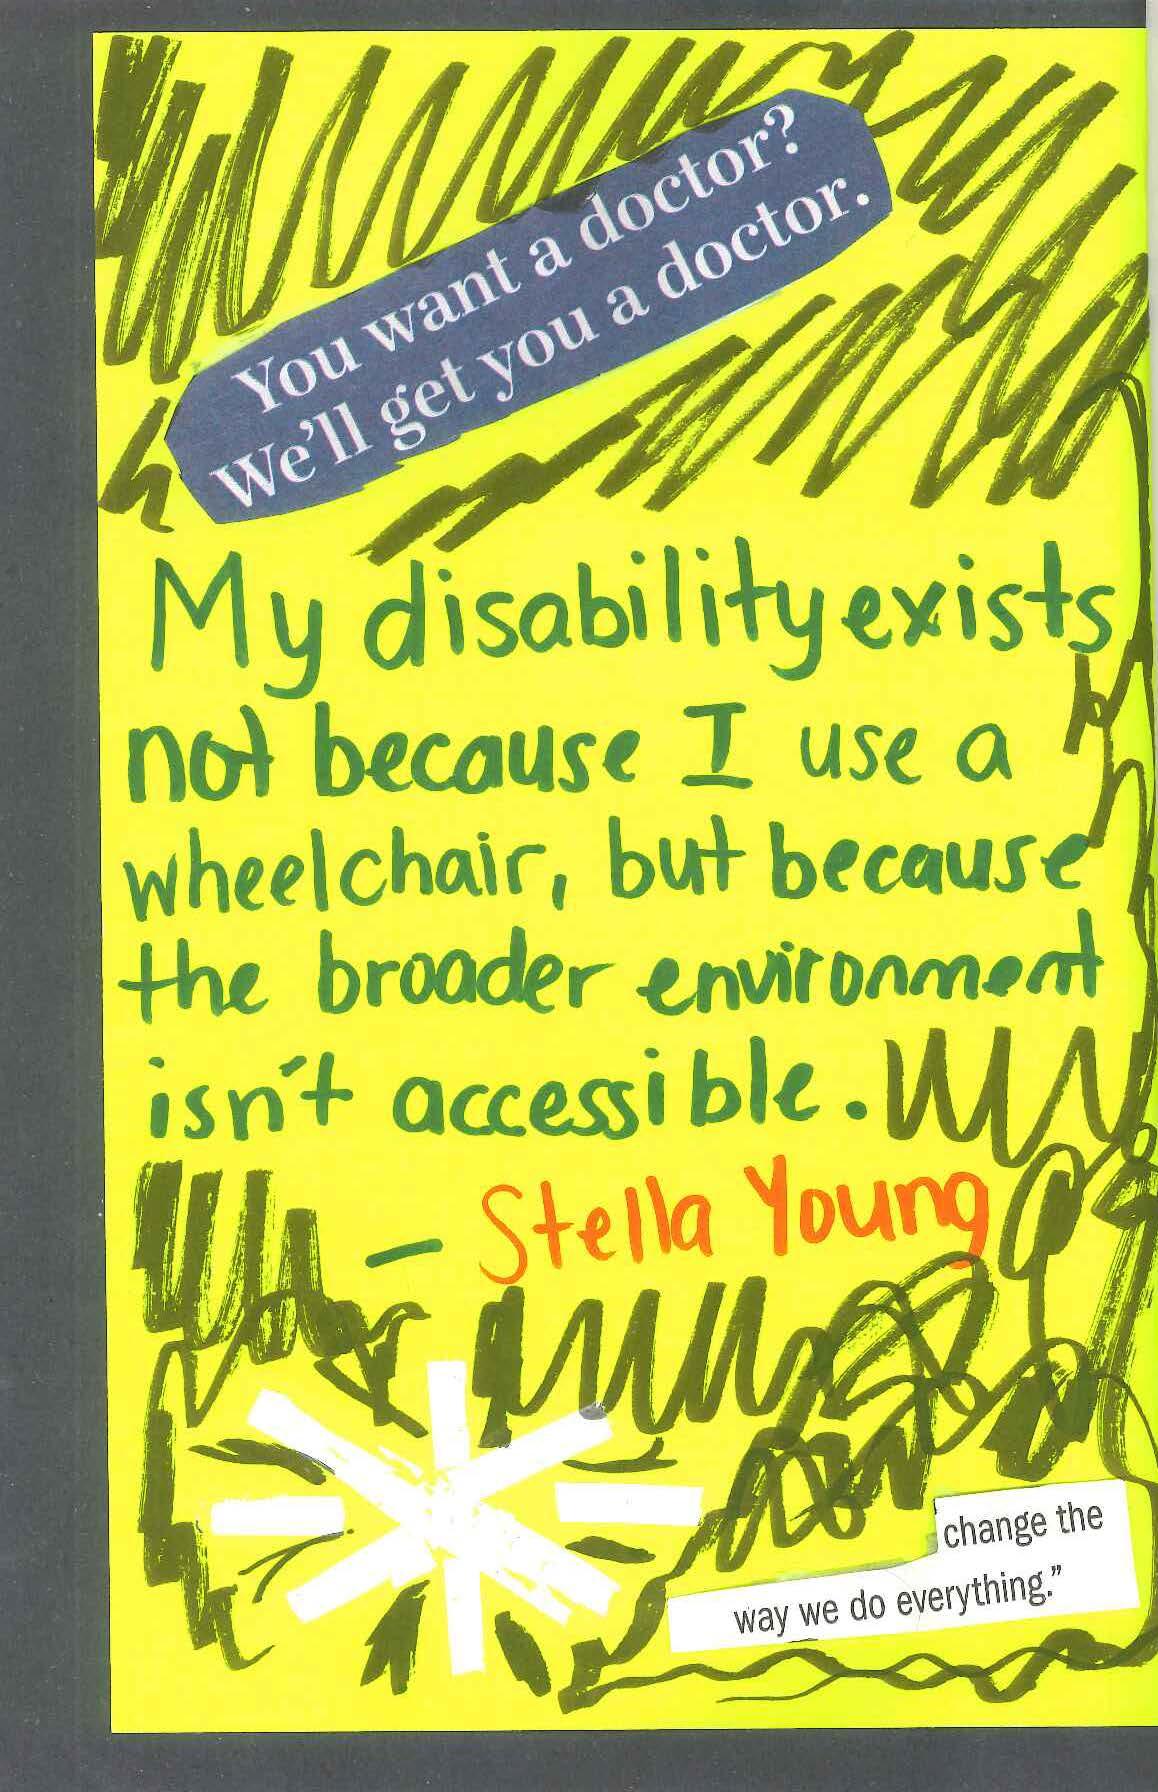 "My disability exists not because I use a wheelchair, but because the broader environment isn't accessible" Stella Young